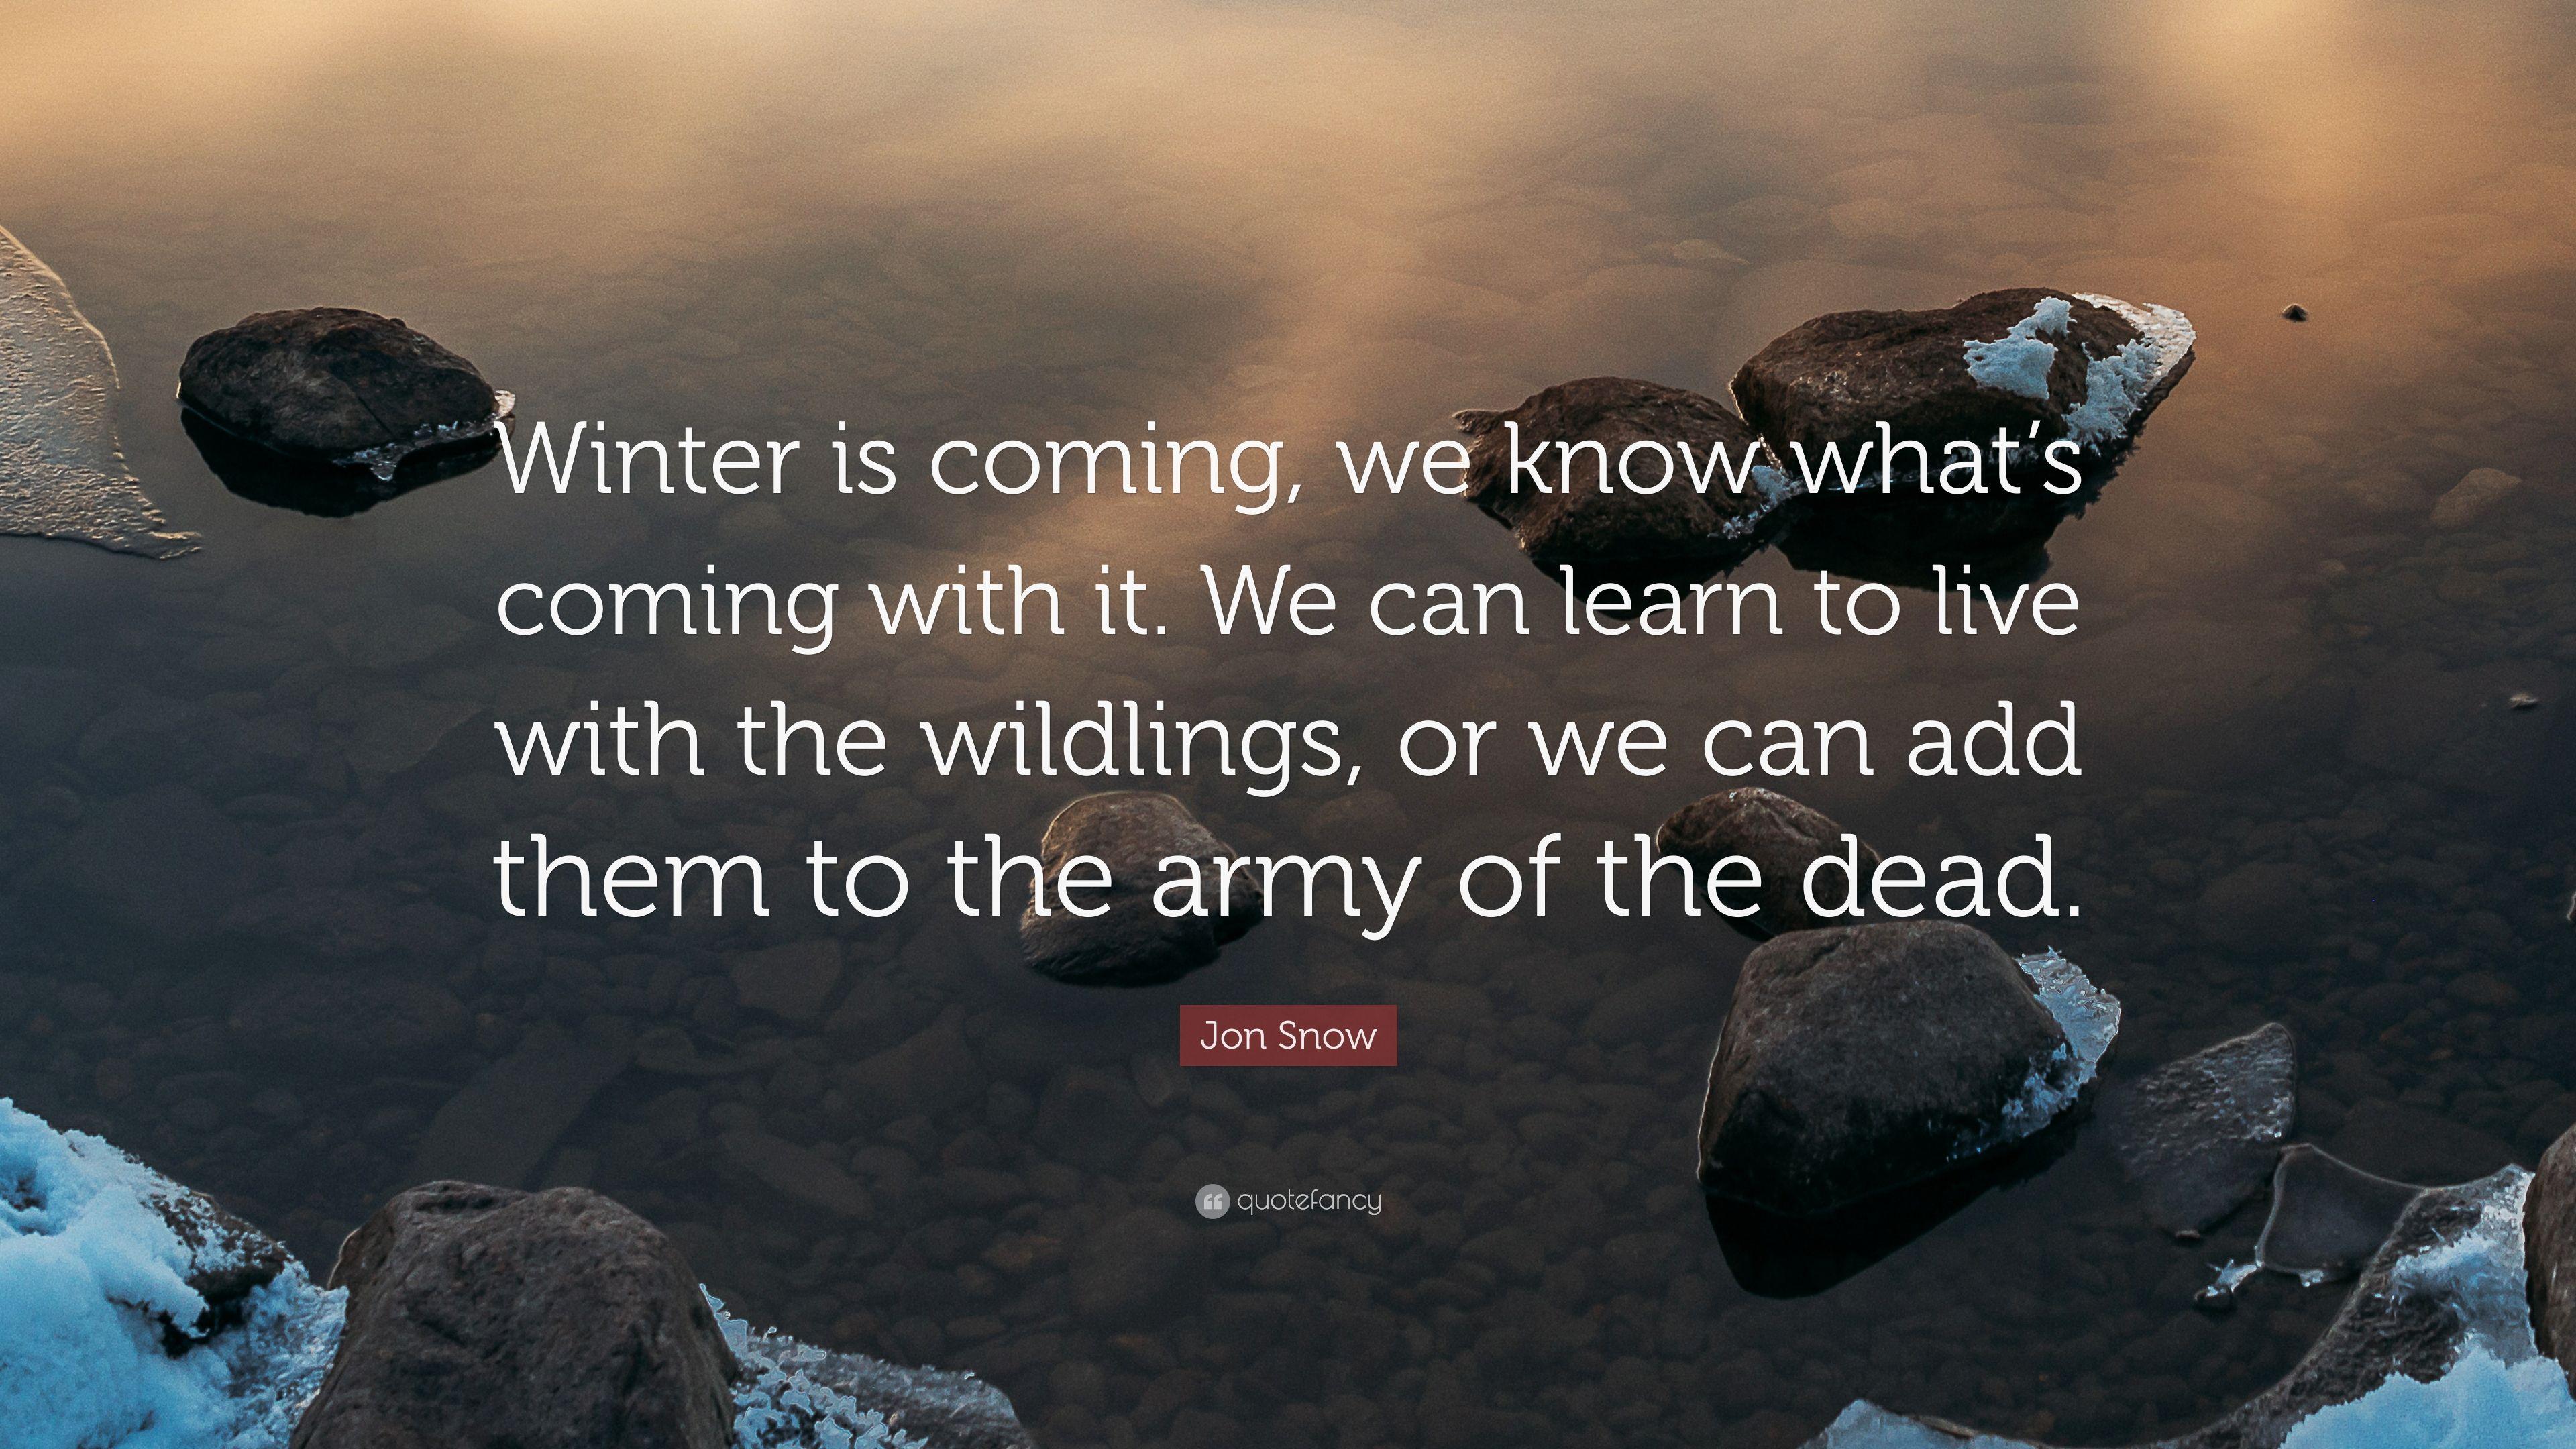 Jon Snow Quote: “Winter is coming, we know what's coming